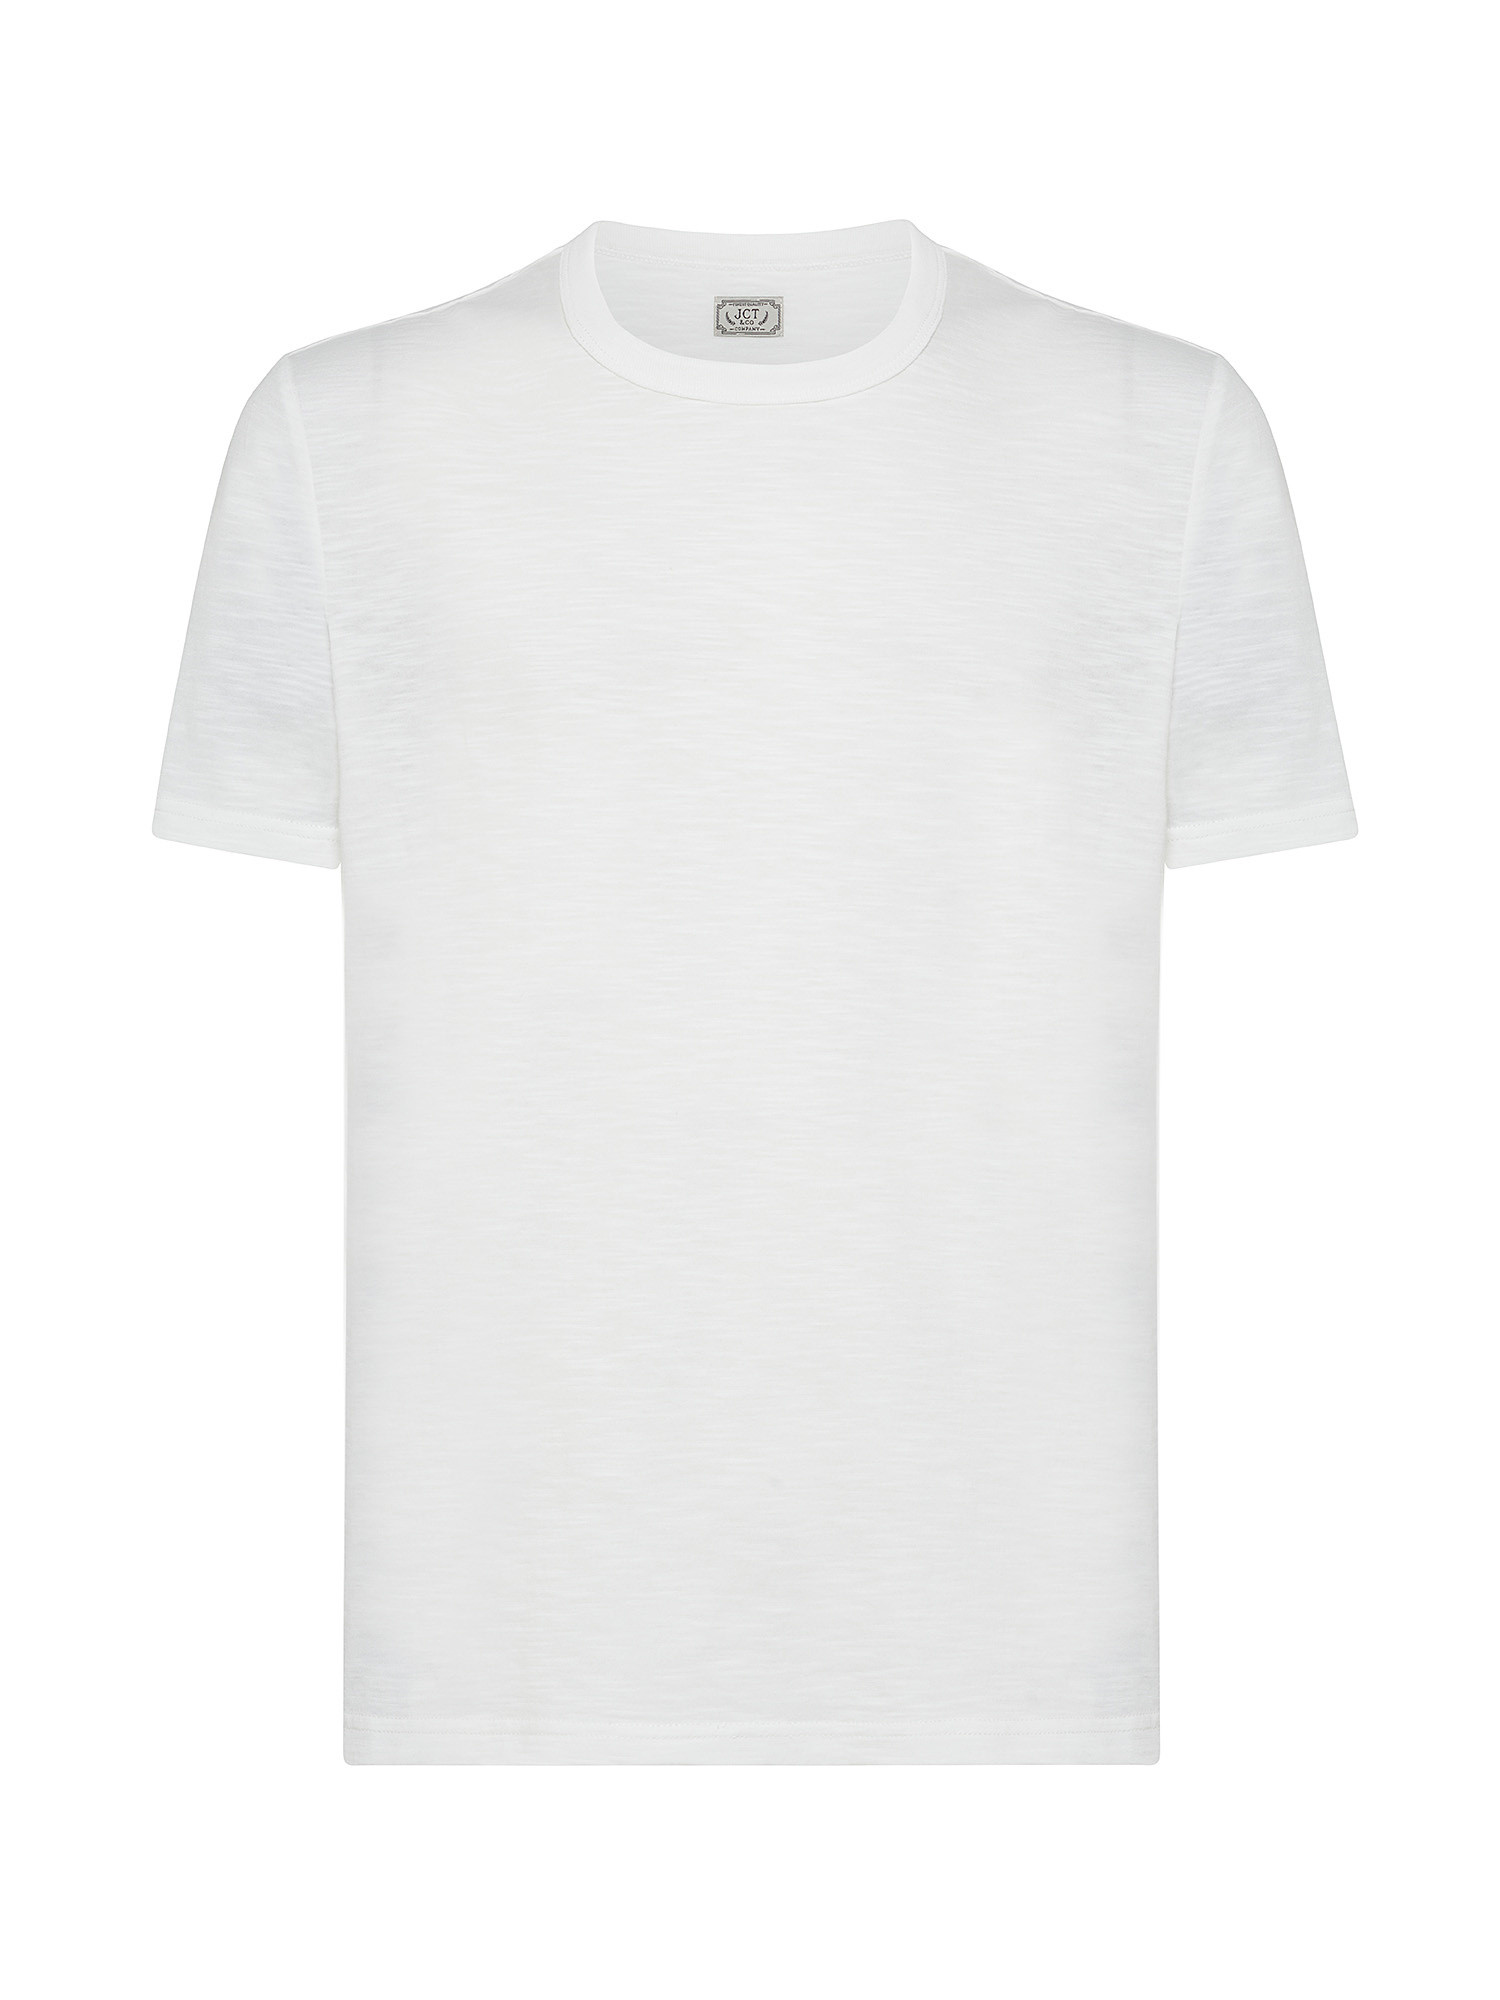 JCT - Pure cotton T-shirt, White, large image number 0